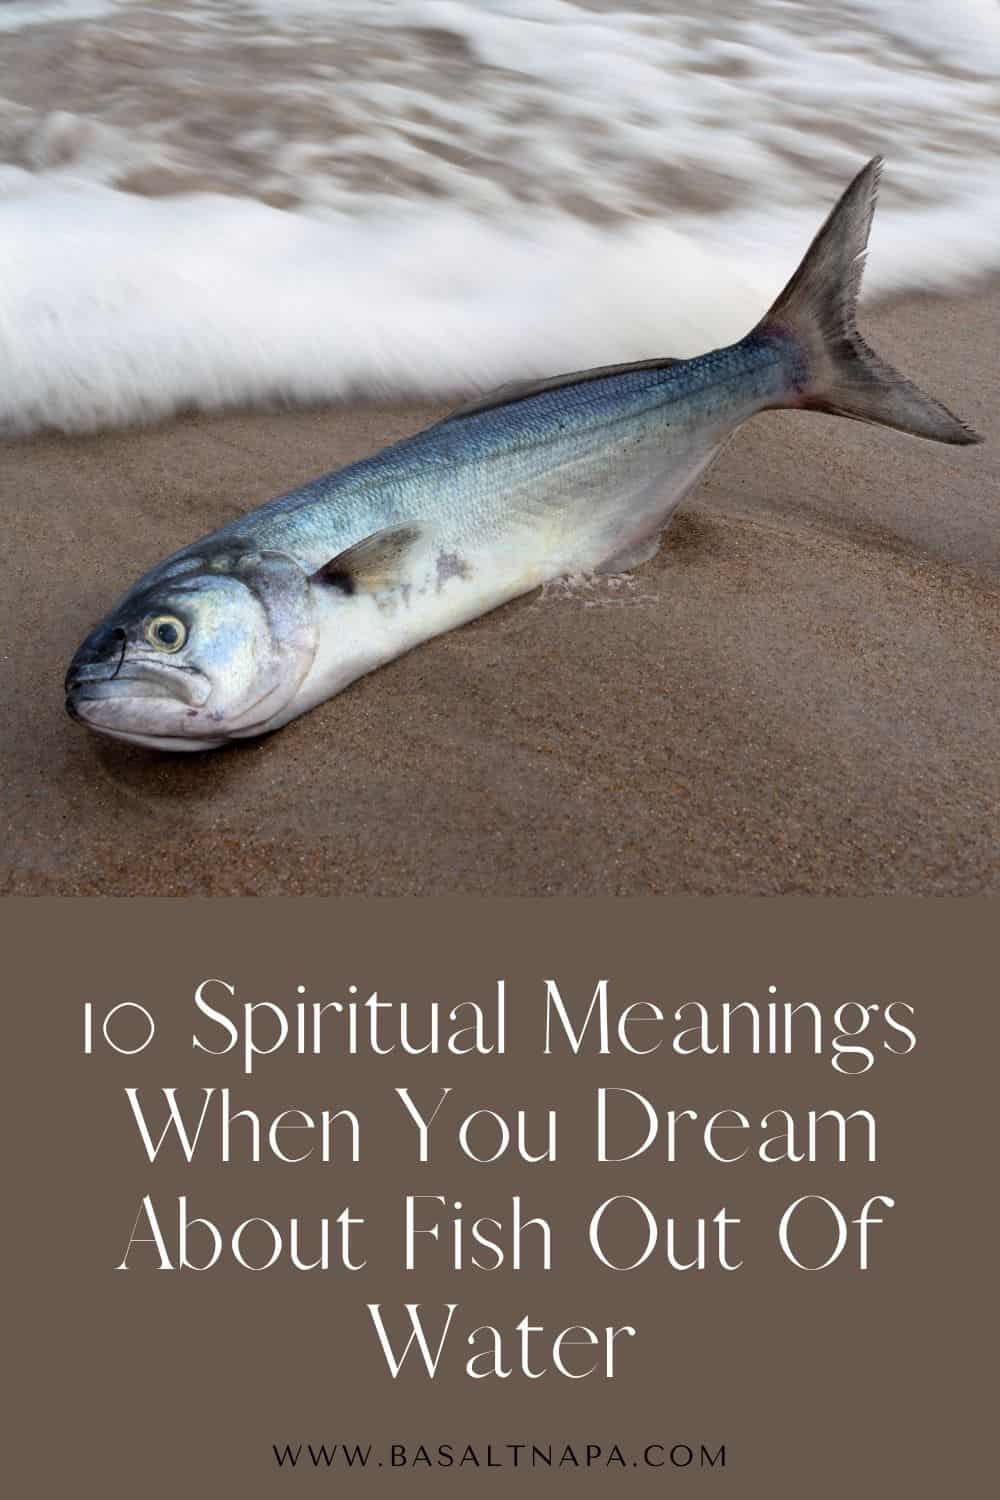 What does it mean when you dream about fish out of water?